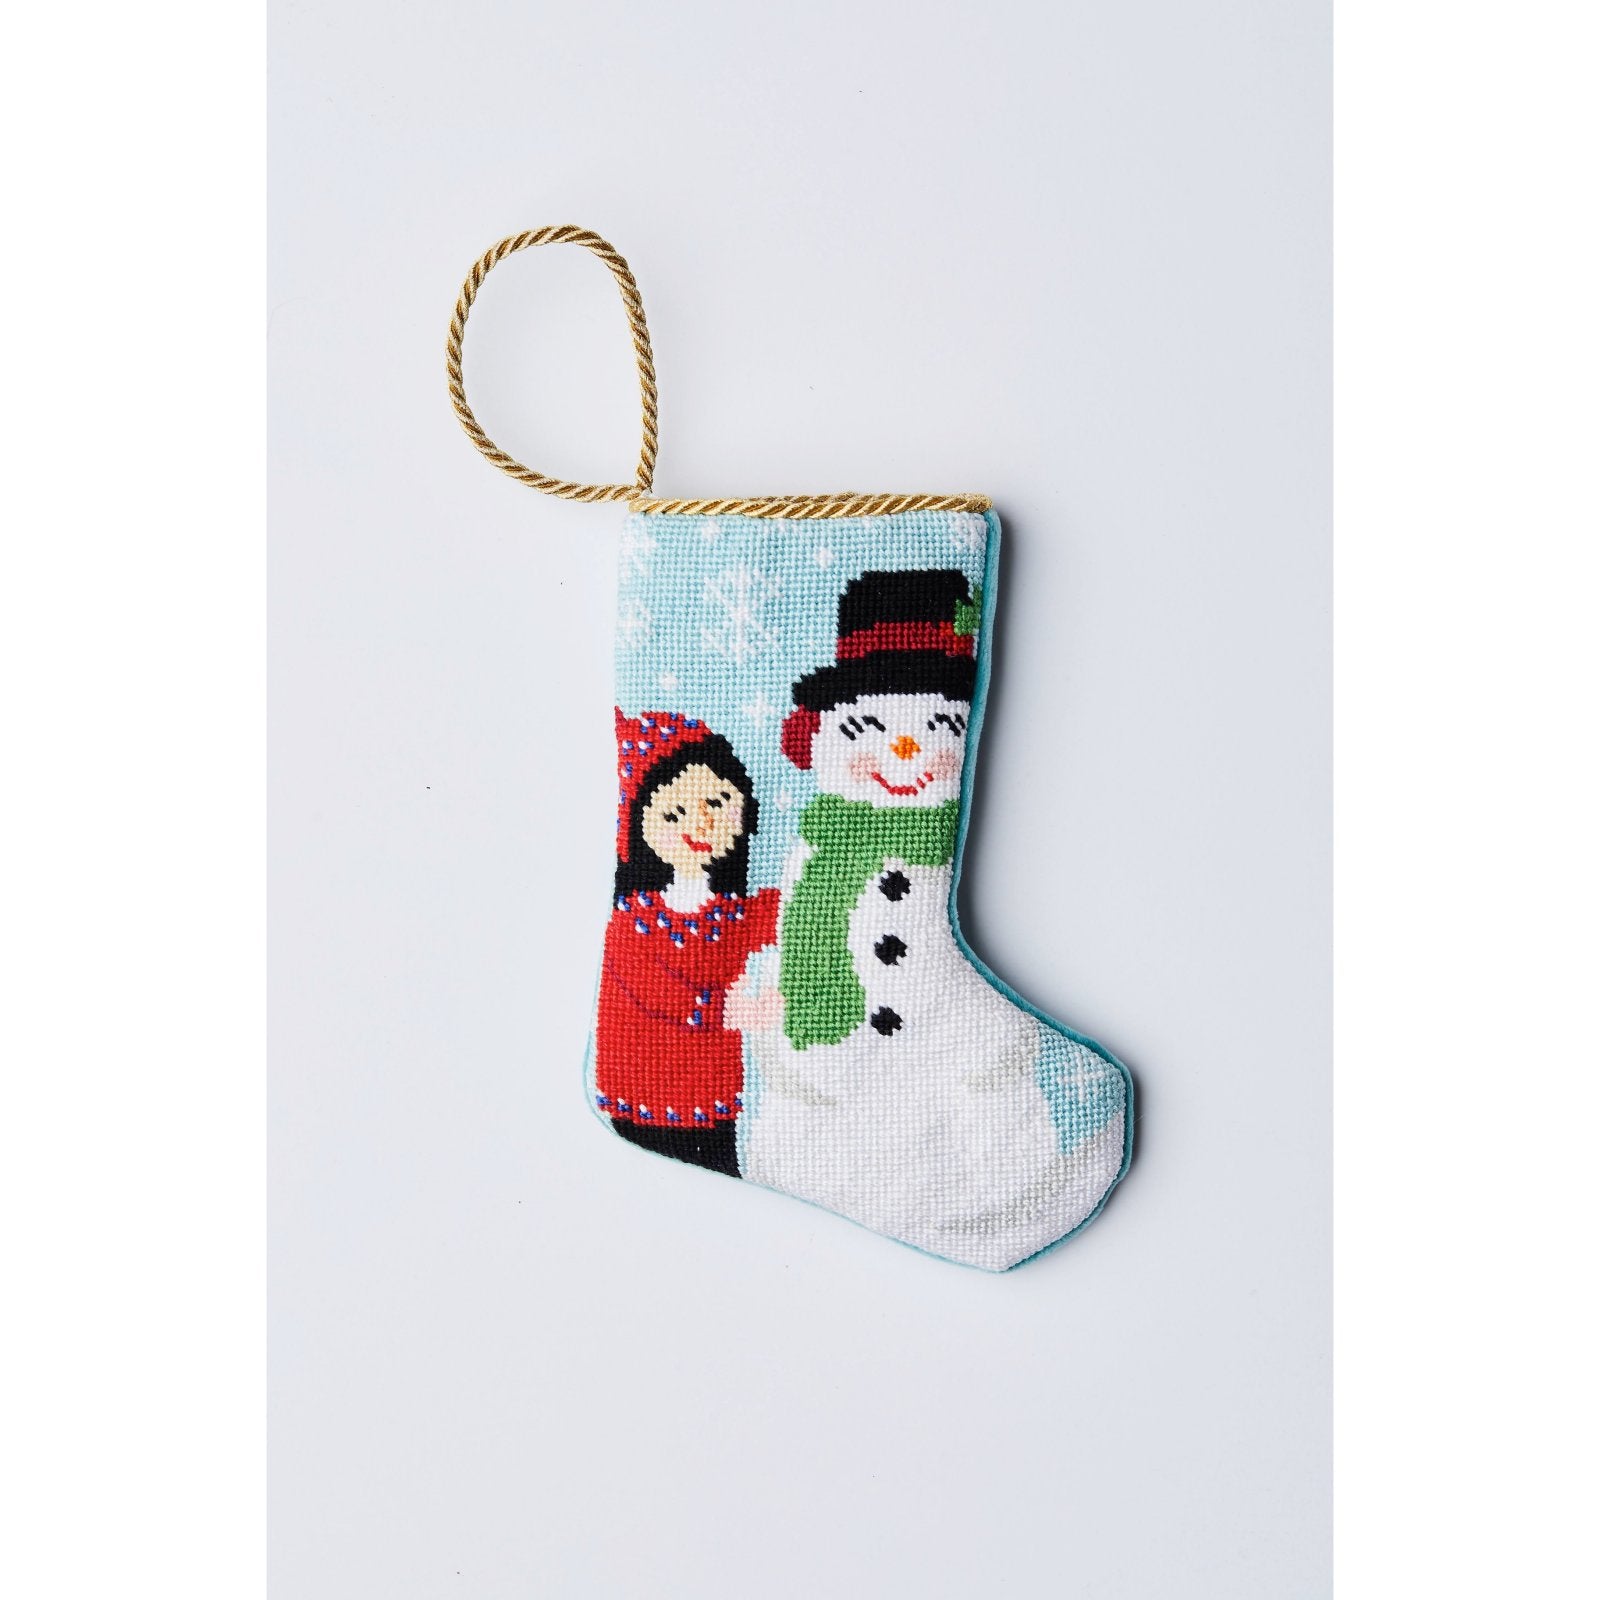 High Flying Santa in Airplane Bauble Stocking – Wool and Willow Needlepoint